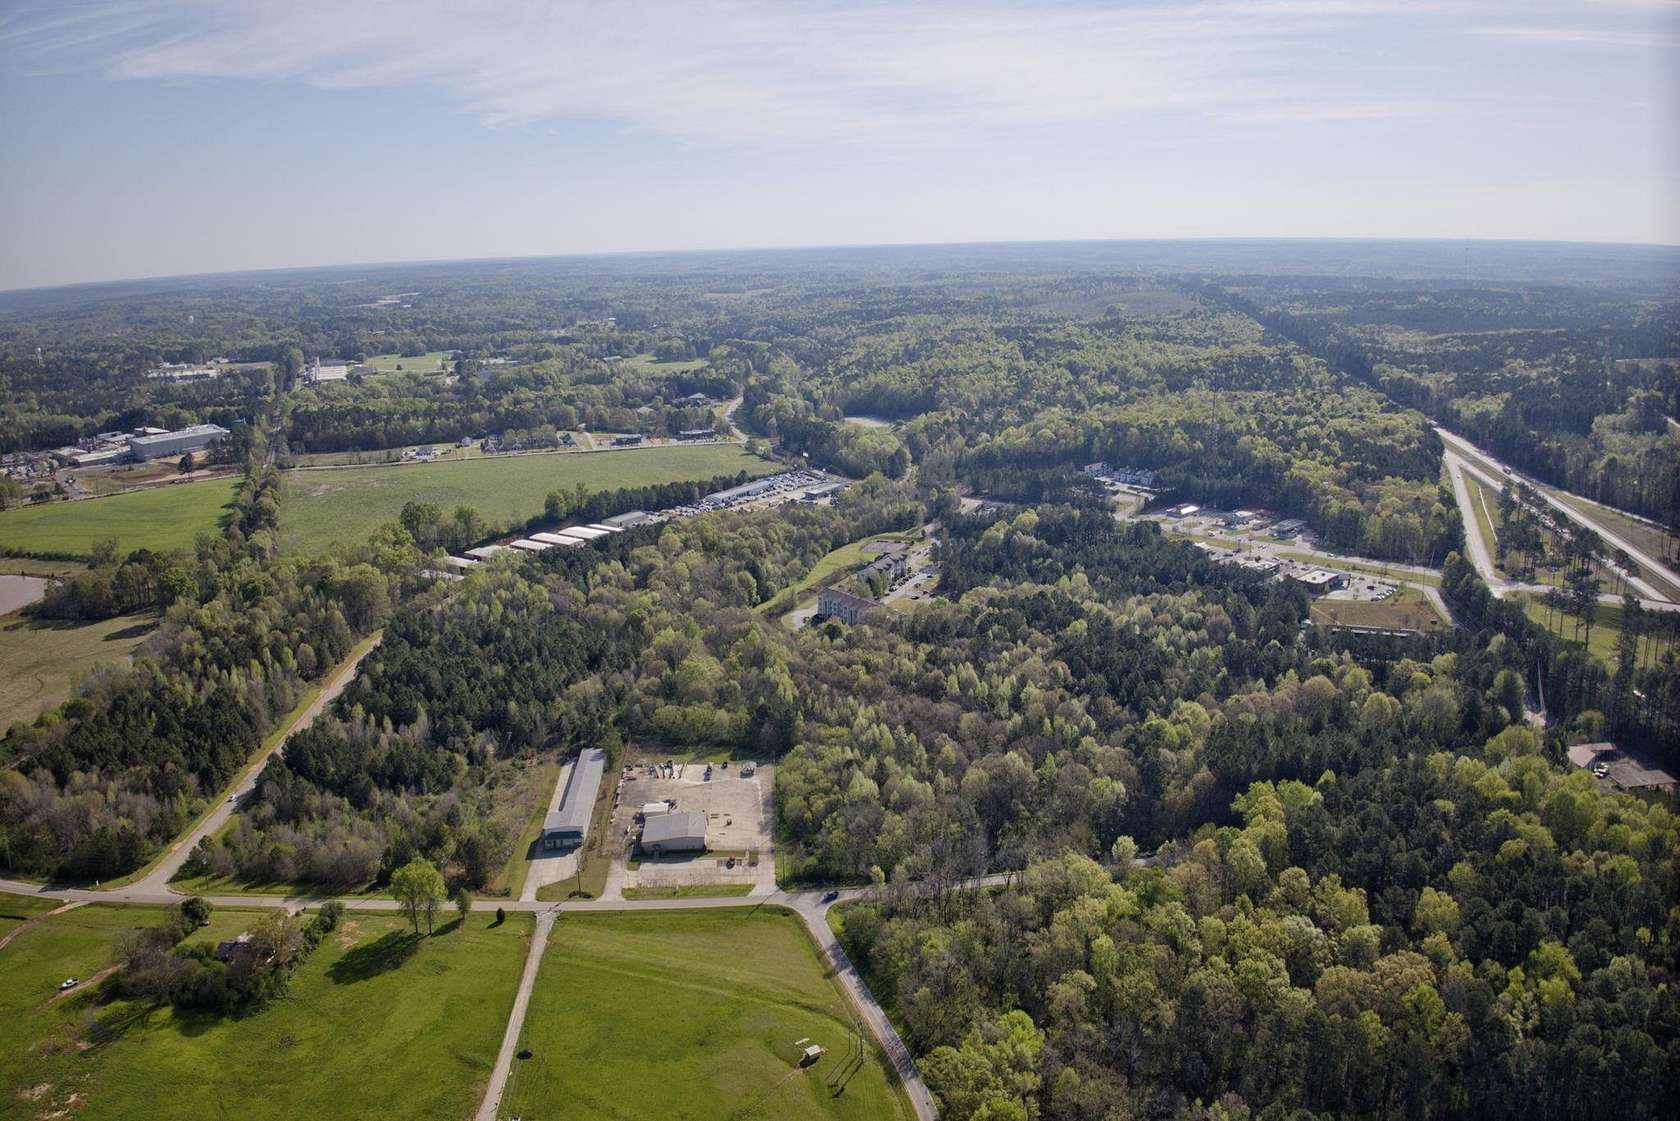 22.6 Acres of Mixed-Use Land for Sale in Greensboro, Georgia